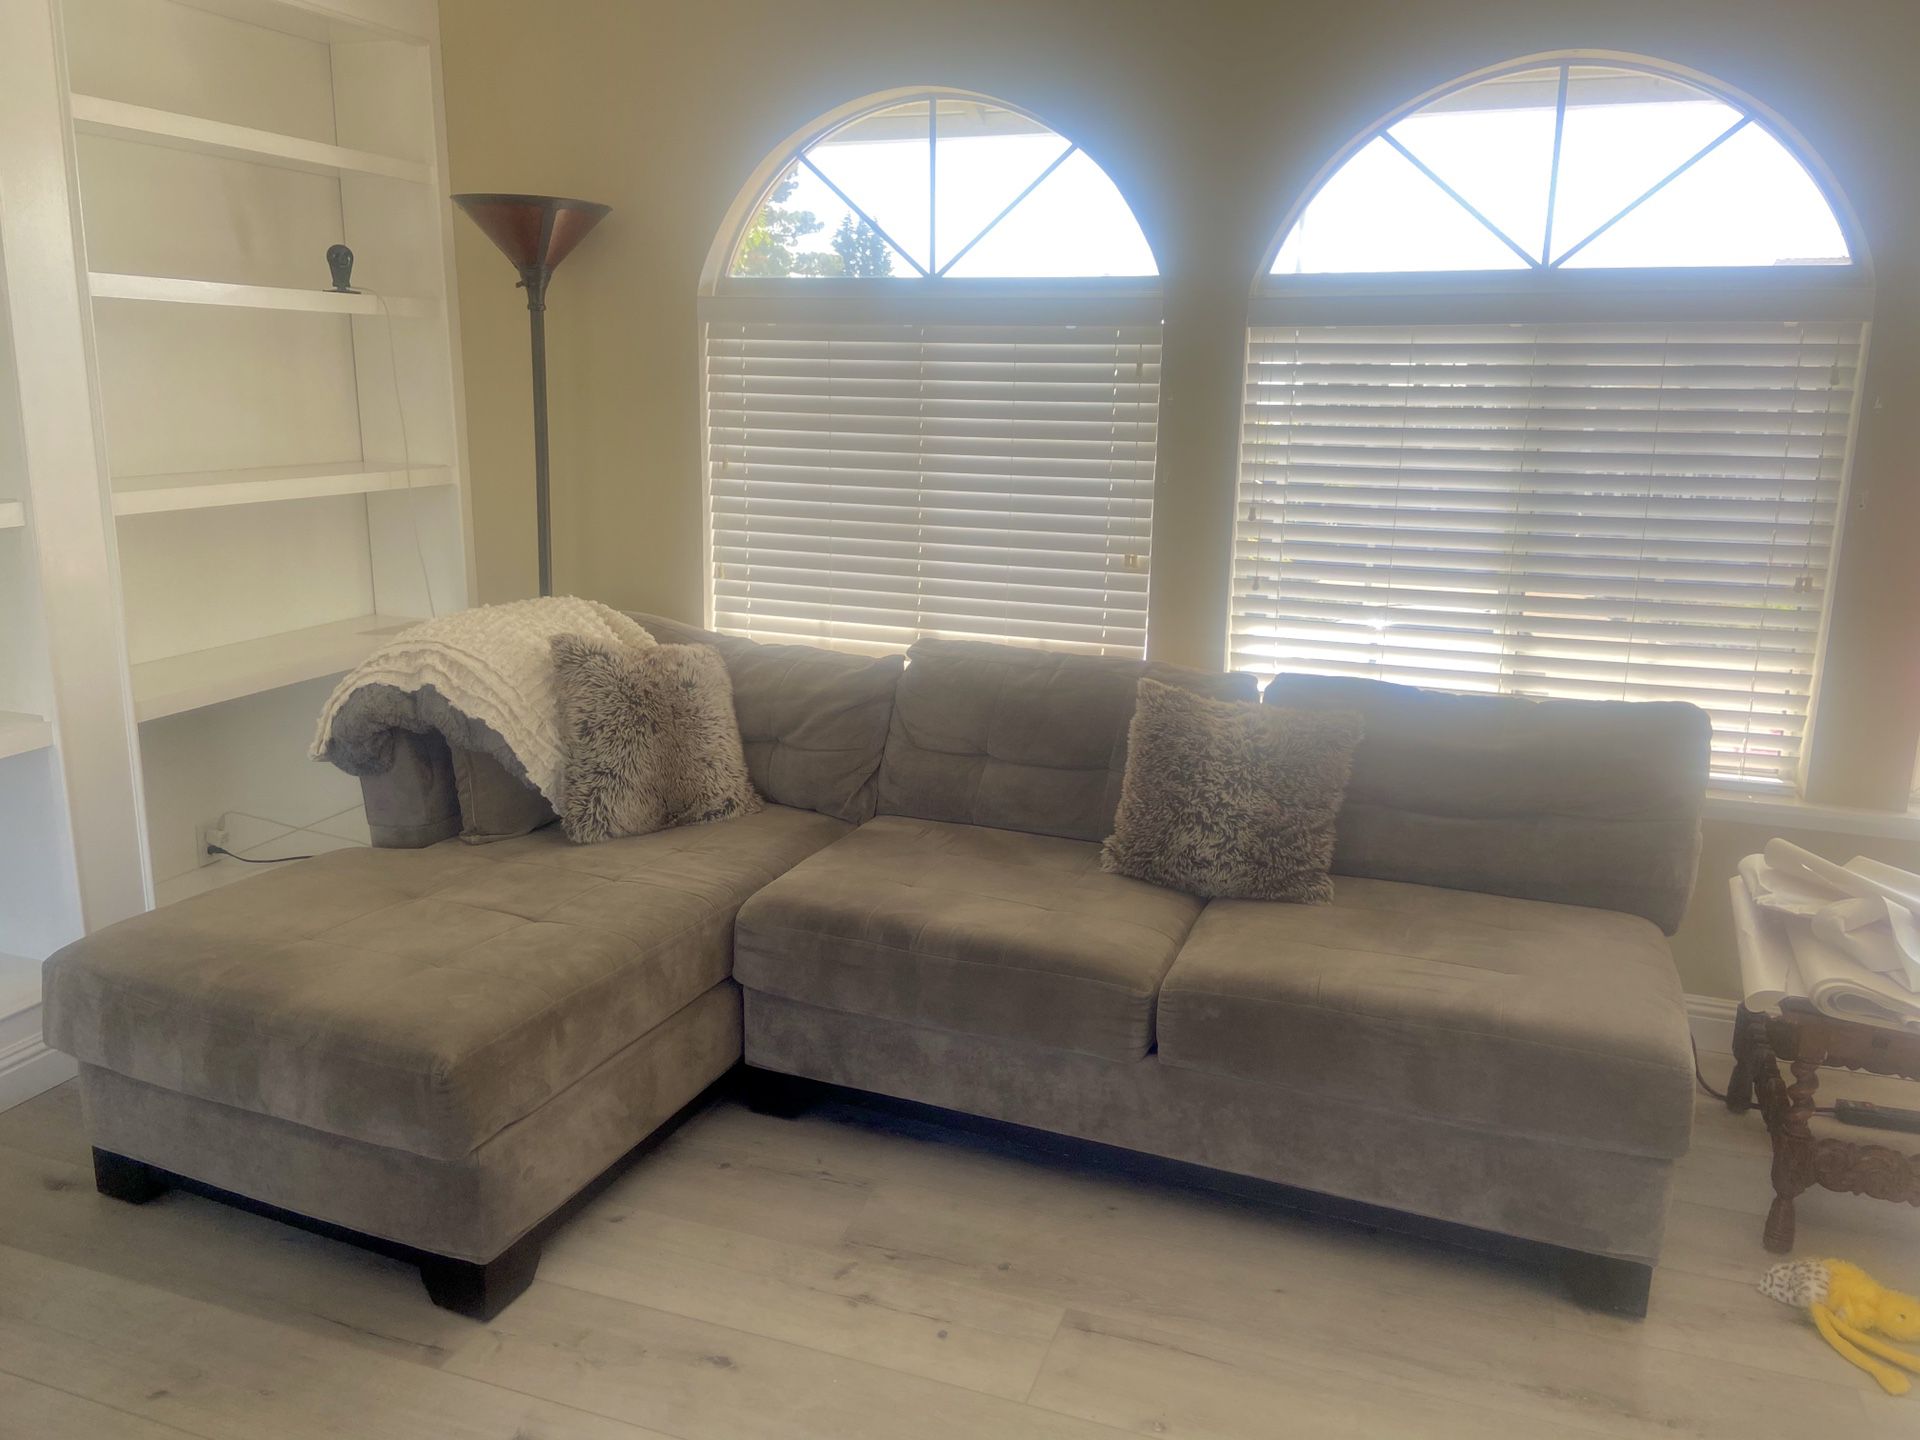 Free couches, 1 light grey micro-suede (sectional) w/ ottoman & one loveseat reclining couch